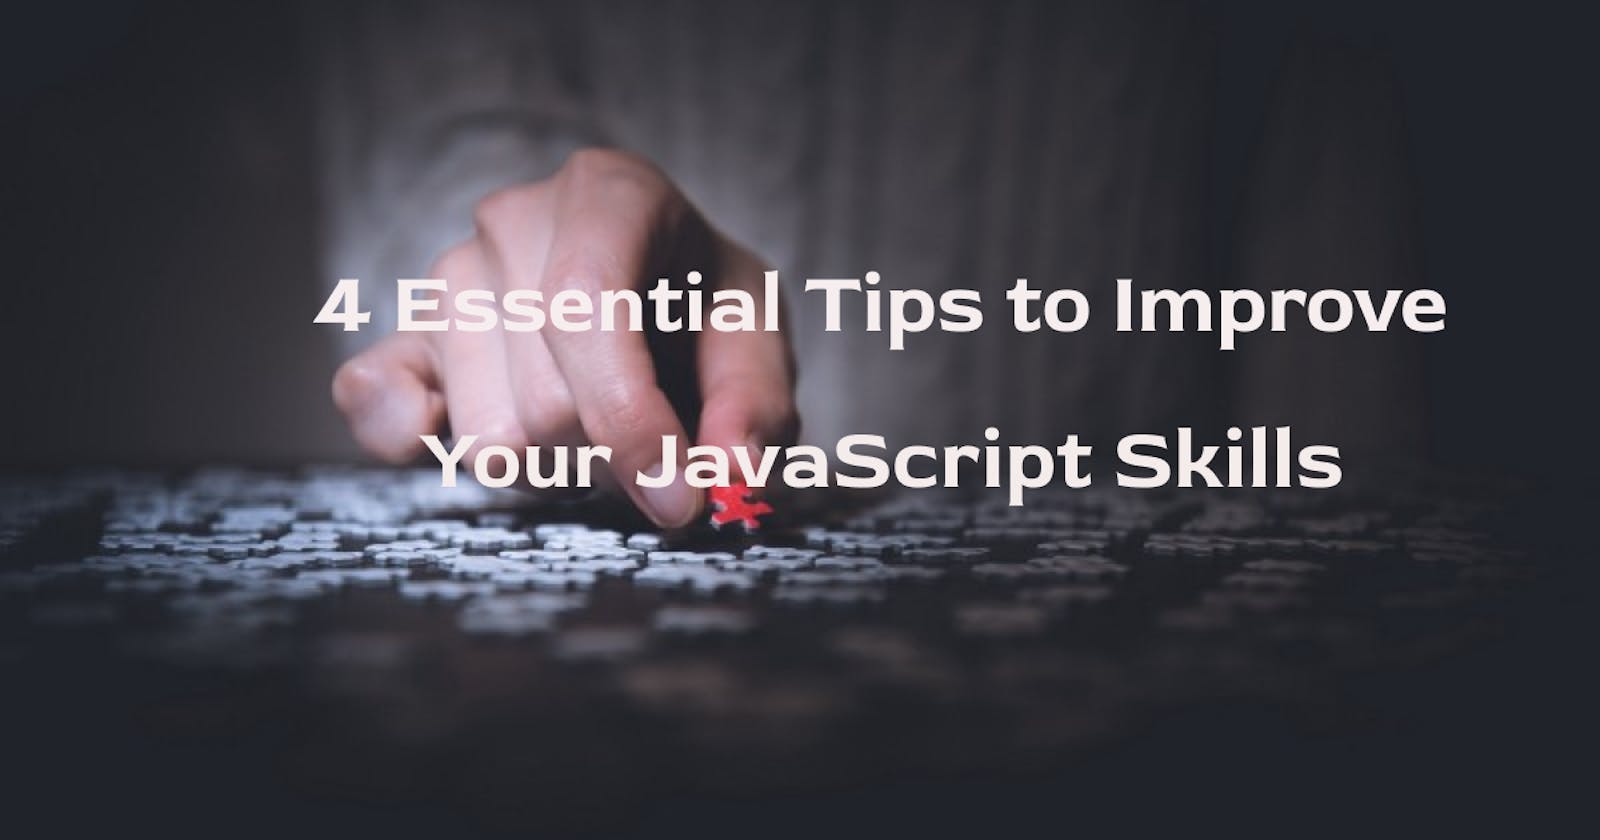 4 Essential Tips to Improve your JavaScript Skills.